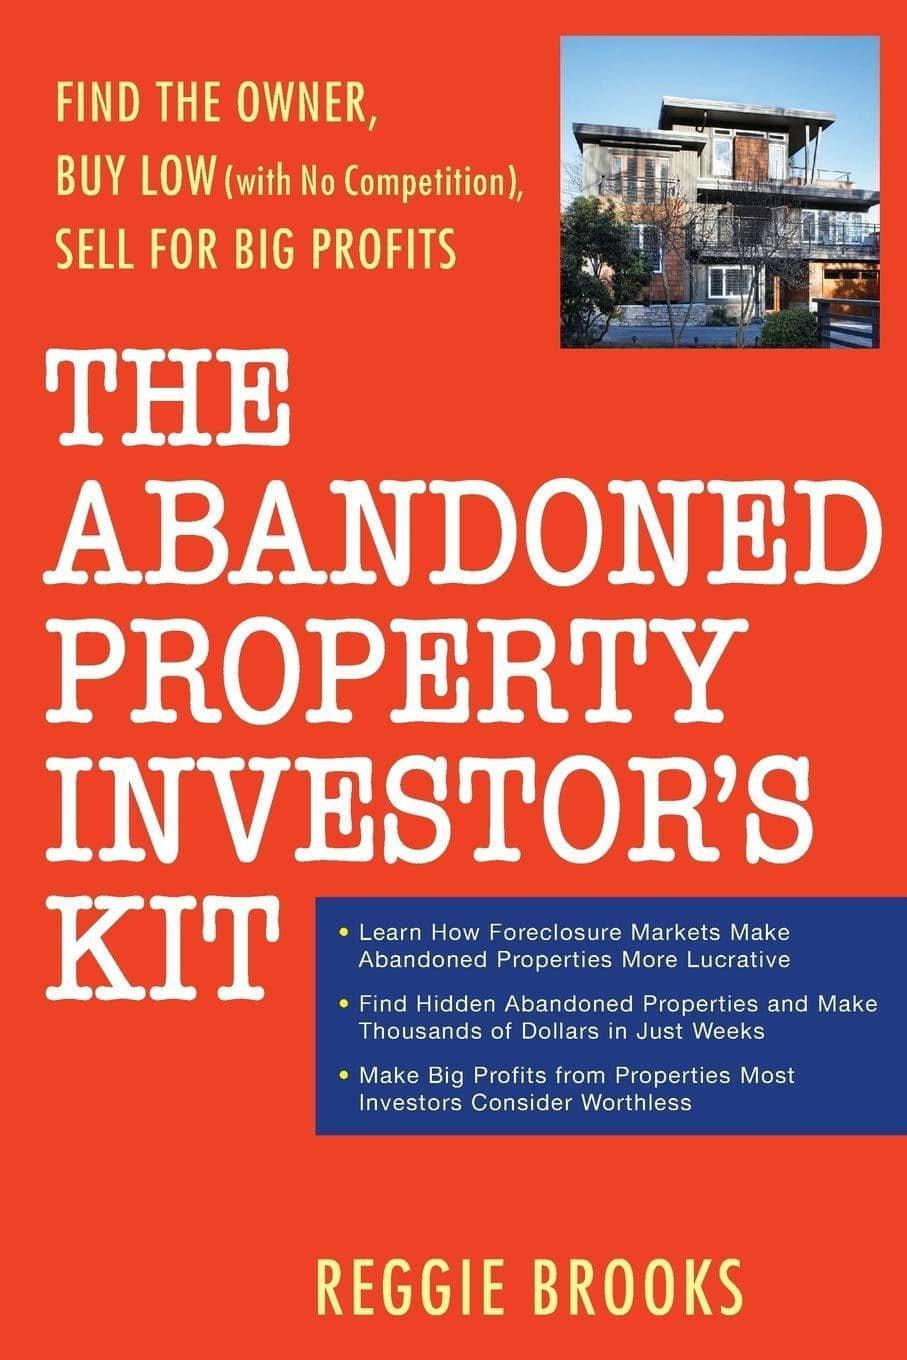 Abandoned Property Investor's Kit: Find the Owner, Buy Low (with - SureShot Books Publishing LLC